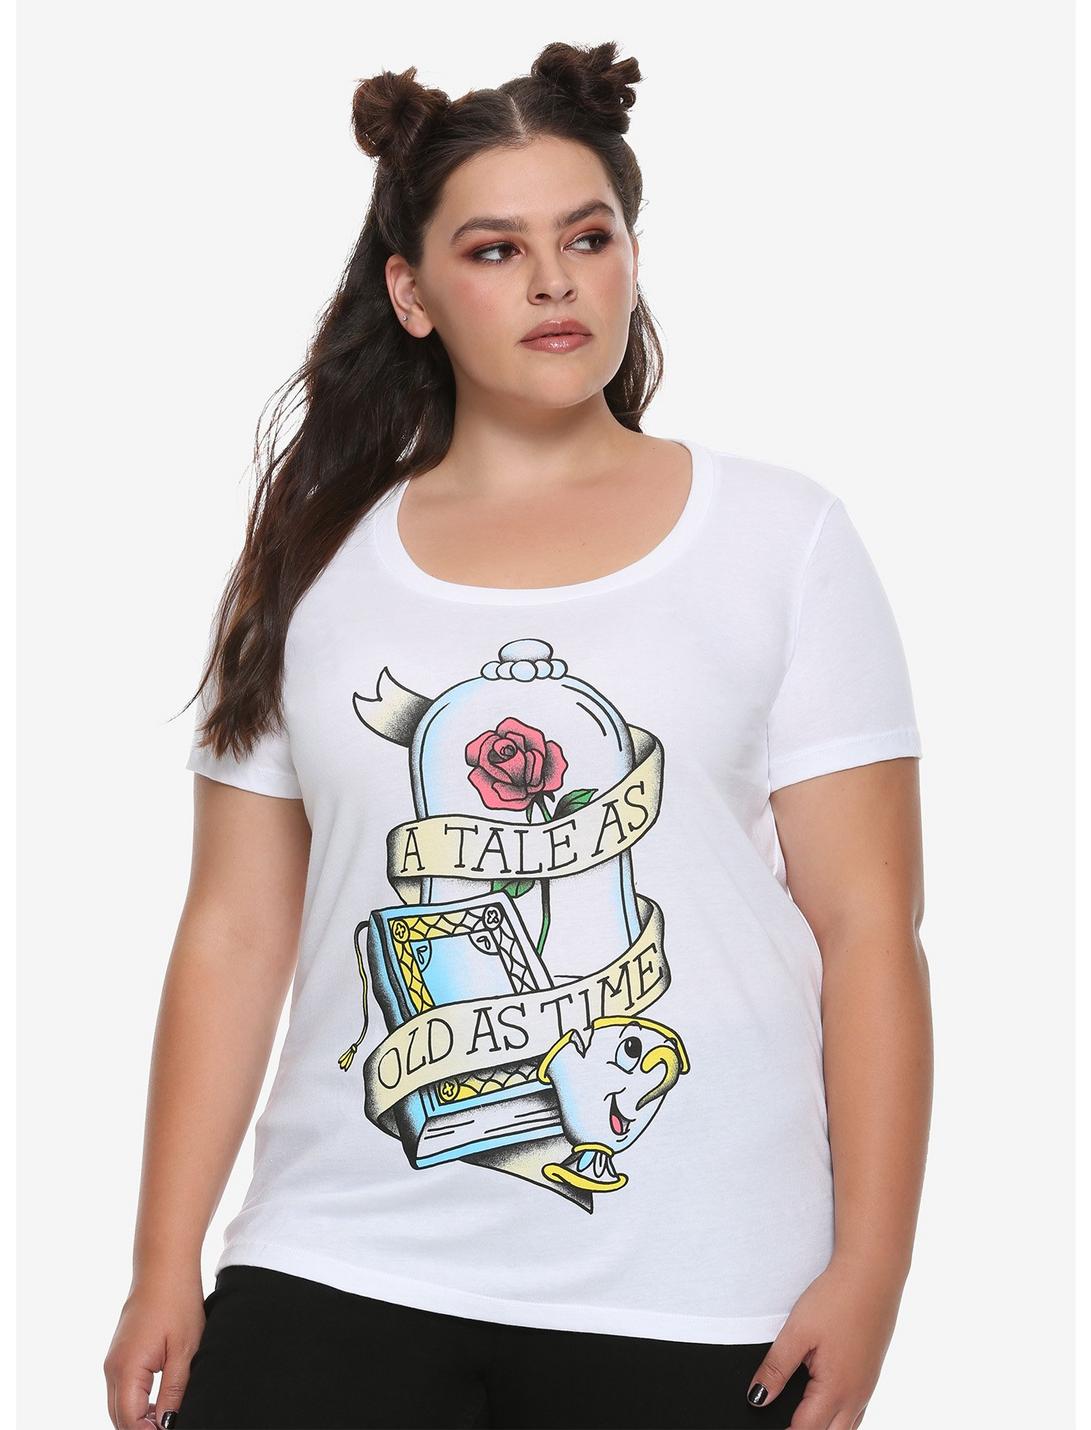 Disney Beauty And The Beast Tale Tattoo Flash Girls T-Shirt Plus Size, MULTICOLOR, hi-res